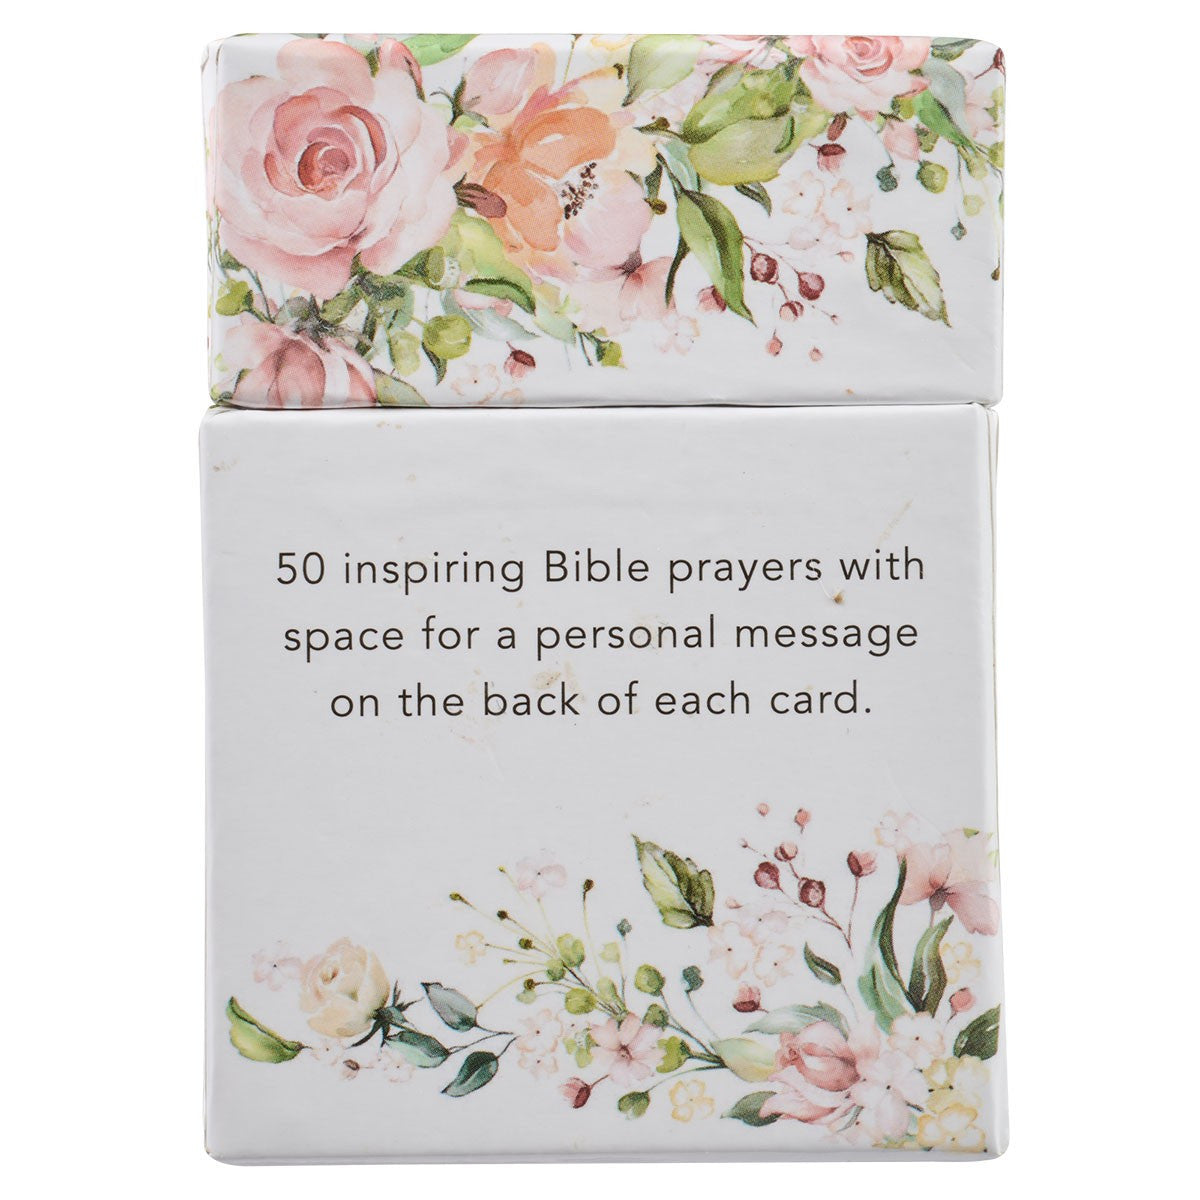 Prayers to Strengthen Your Faith | Box of Blessings